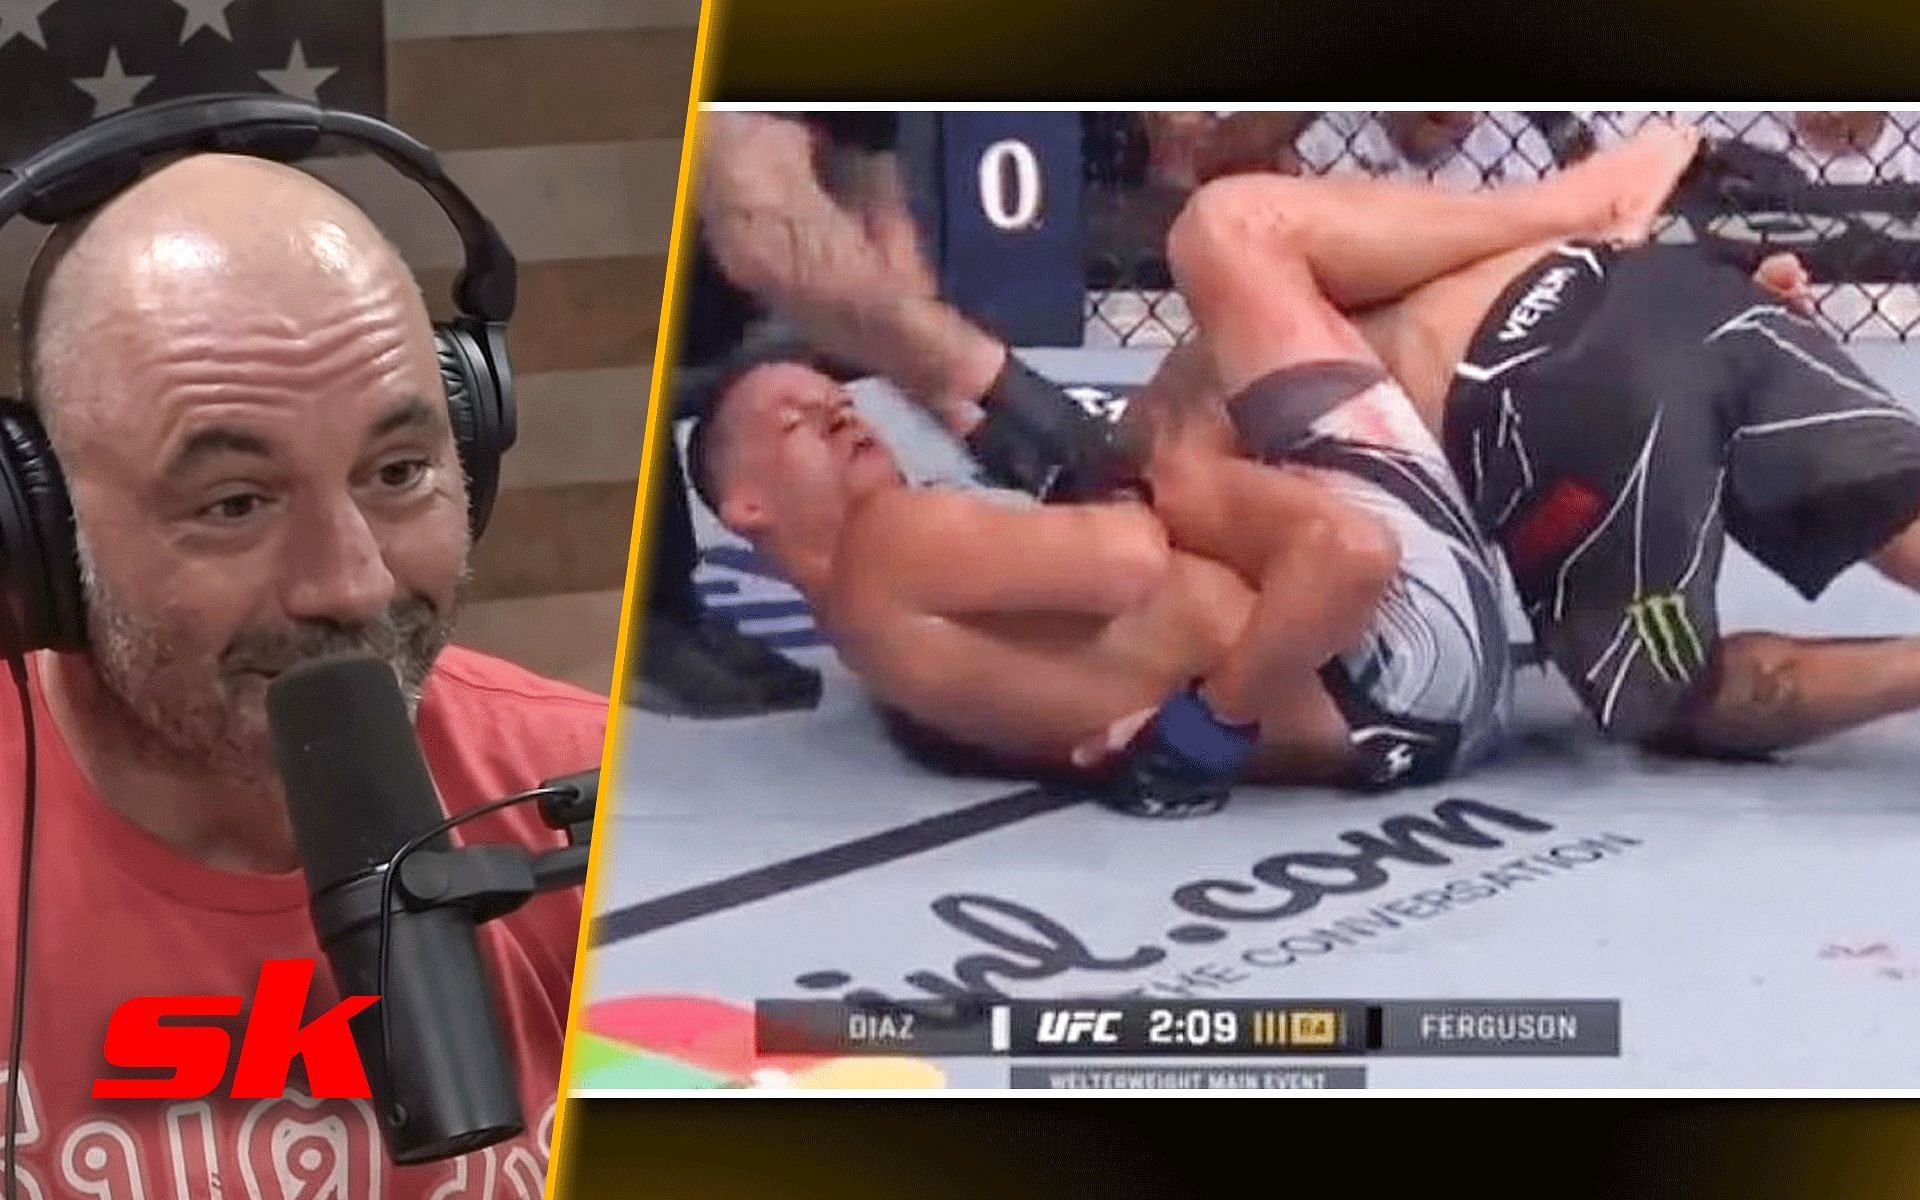 Joe Rogan reacts to Nate Diaz submitting Tony Ferguson precisely at 2:09 mark of R4 [Images via JRE Clips │YouTube and @mmamania Twitter]